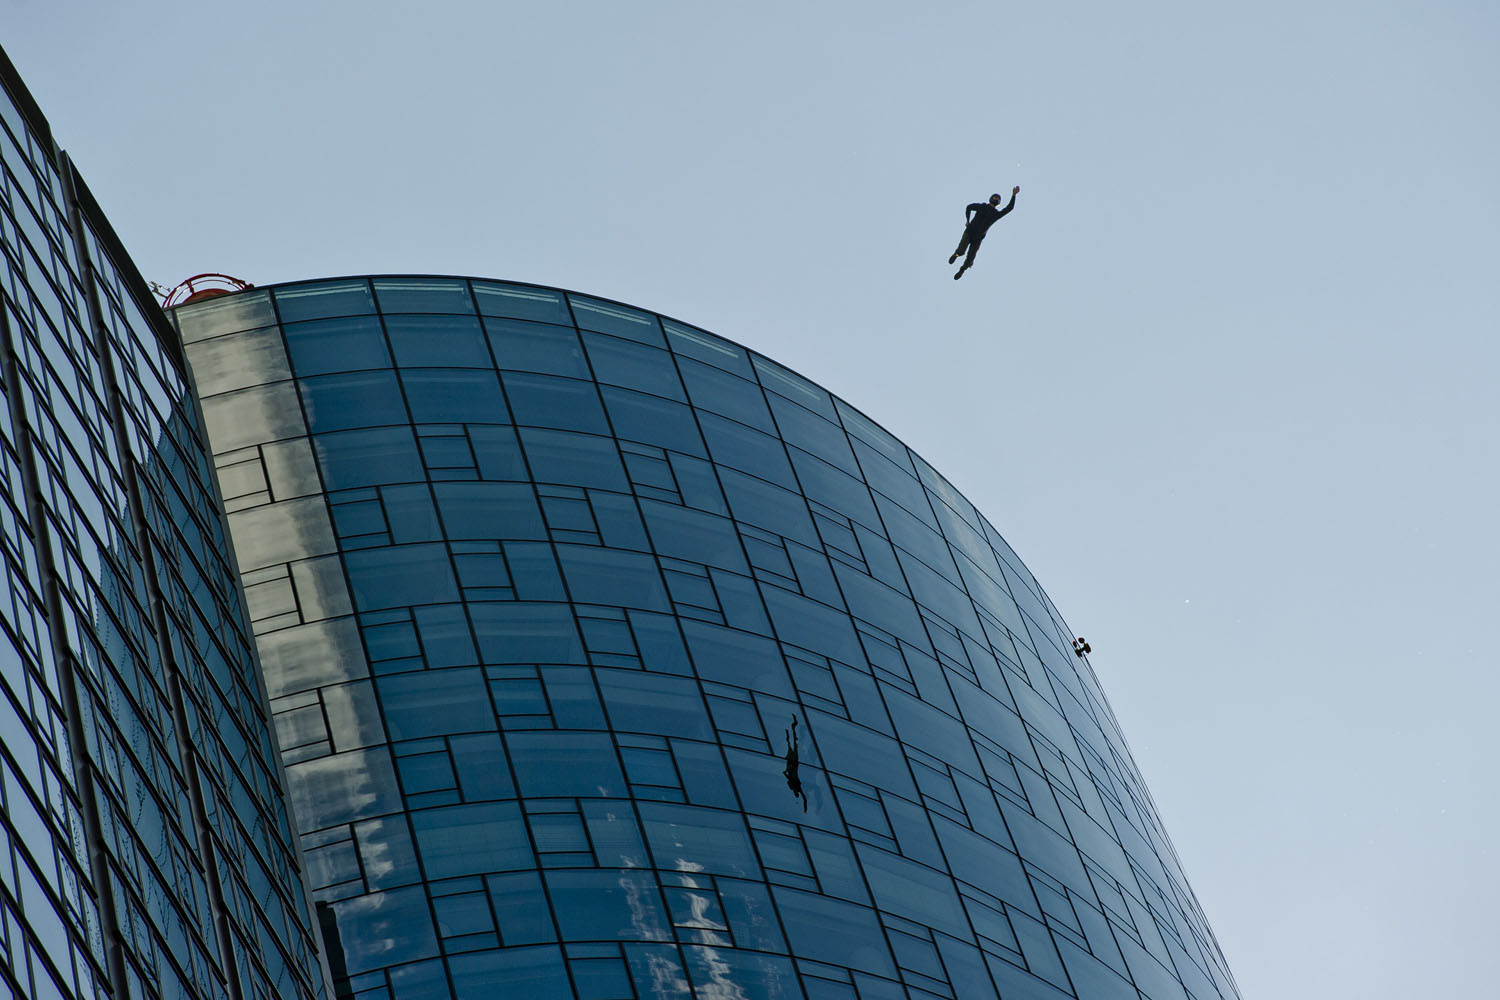 May 25, 2013. A base-jumper jumps off the Maintower as part of the sky scraper festival in Frankfurt am Main, Germany.